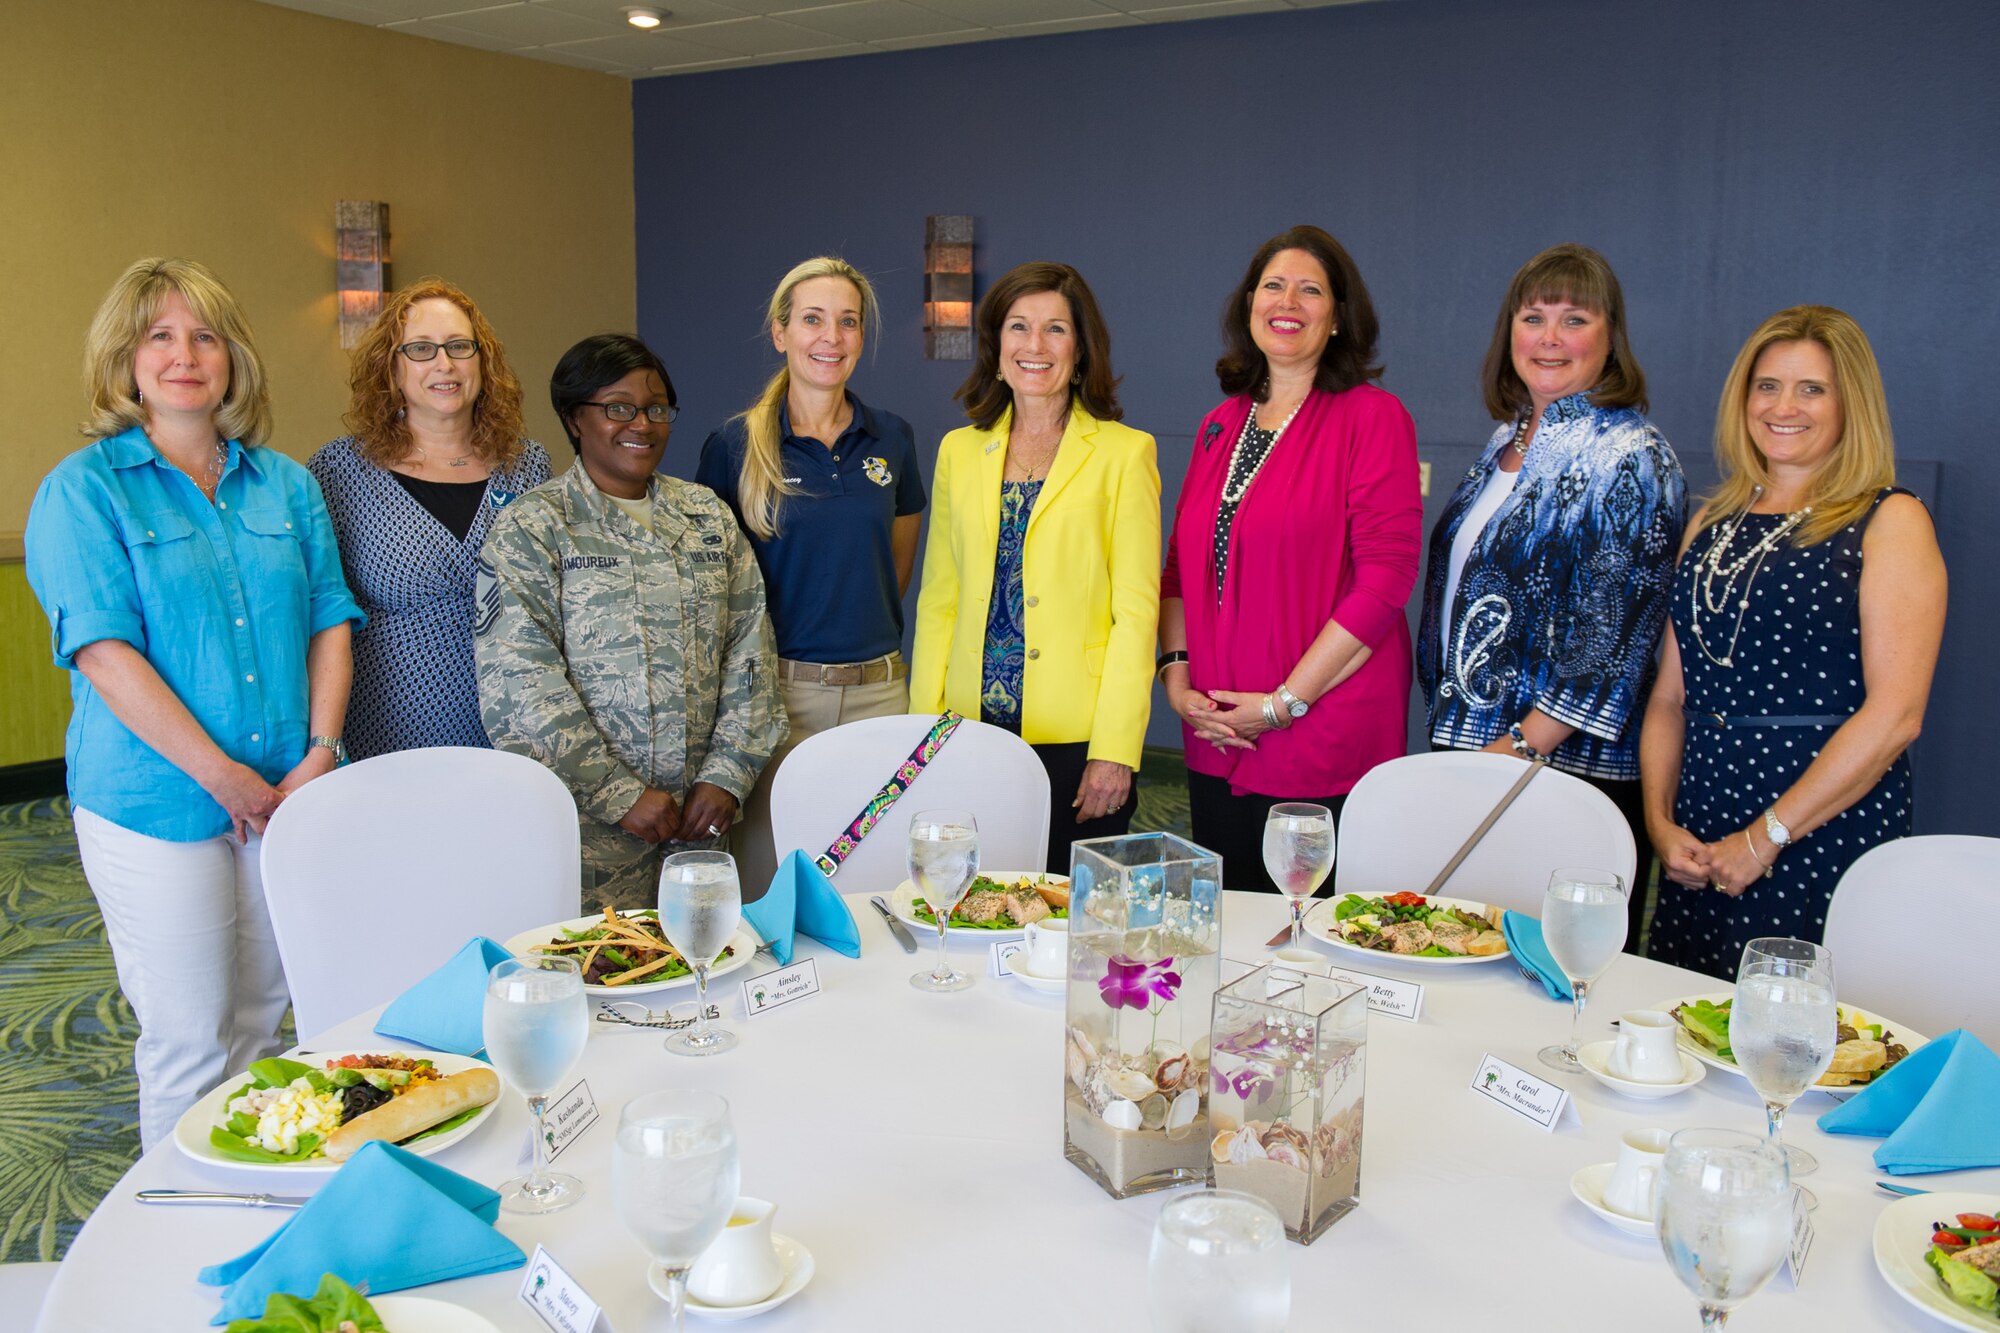 Betty, wife of Air Force Chief of Staff Gen. Mark A. Welsh III, (fourth from right), shares conversation with spouses of senior leaders during lunch at the Tides Club, Patrick Air Force Base, Fla., May 9, 2016. The spouses discussed their role in today's Air Force, serving alongside the commanders they are married to. The general and his wife spent a day meeting Airmen and their families and learning about the 45th Space Wing mission and mission partners at Patrick Air Force Base and Cape Canaveral Air Force Station, Fla. (U.S. Air Force photo by Benjamin Thacker/Released)